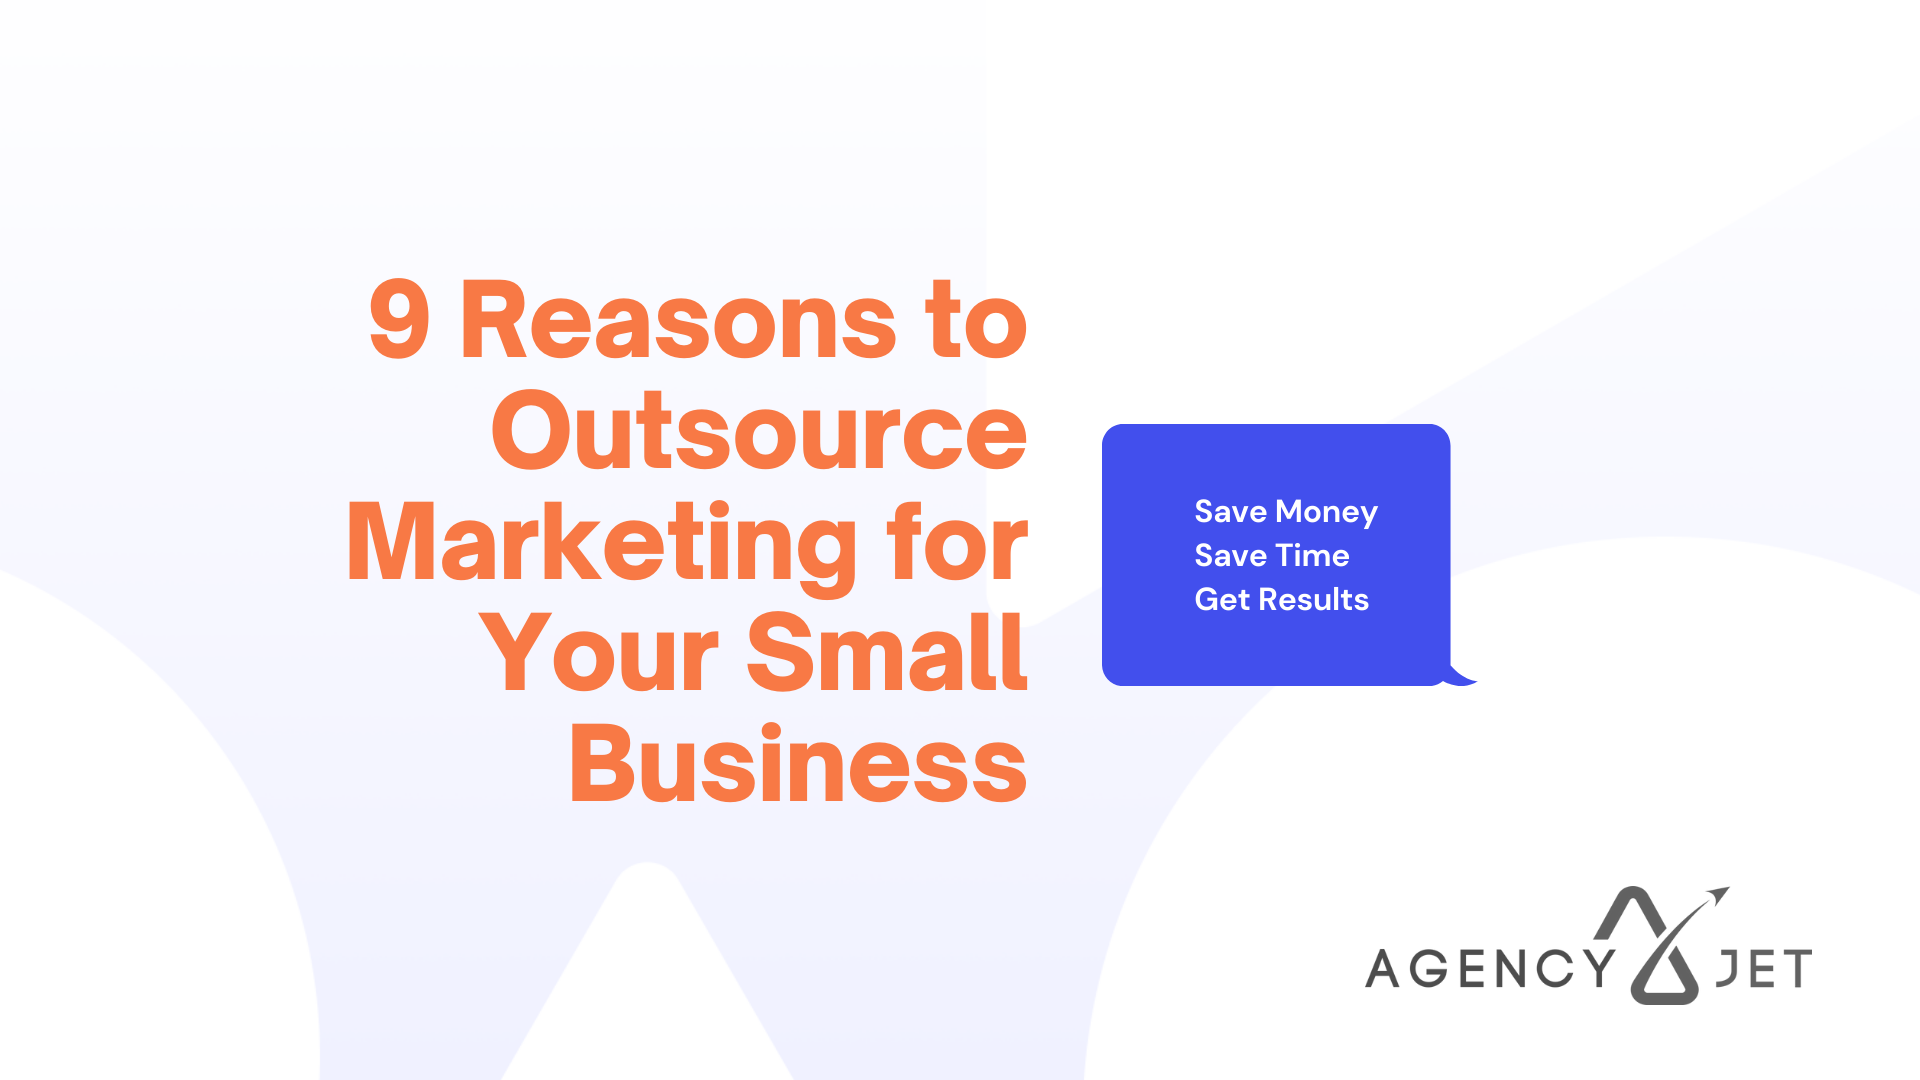 9 Reasons to Outsource Marketing for Your Small Business - Agency Jet